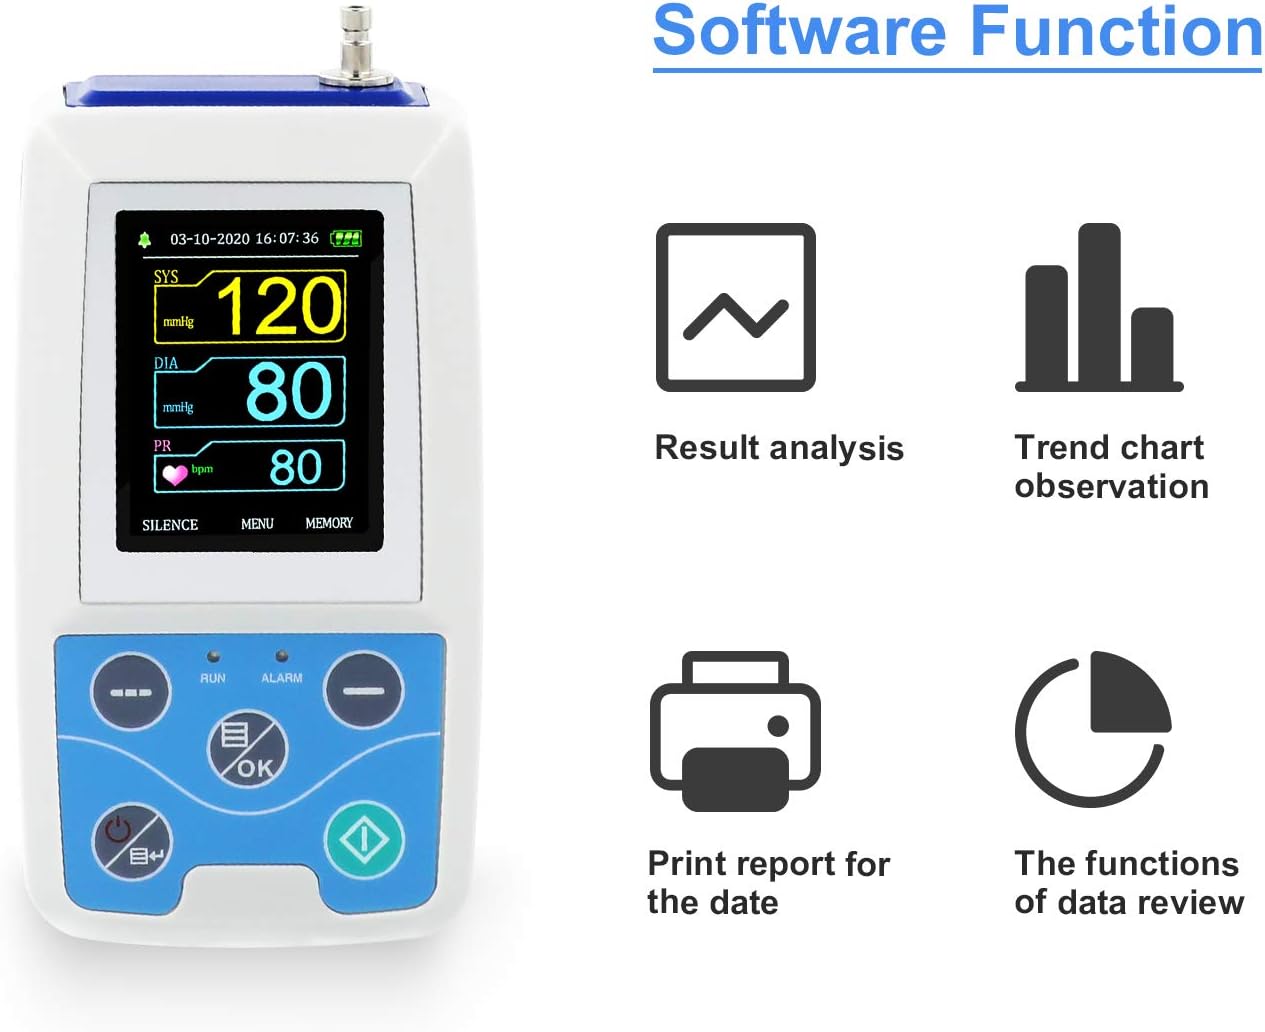 CONTEC ABPM50 Handheld 24hours Ambulatory Blood Pressure Monitor with 2cuffs(25-35cm33-47cm),NIBP